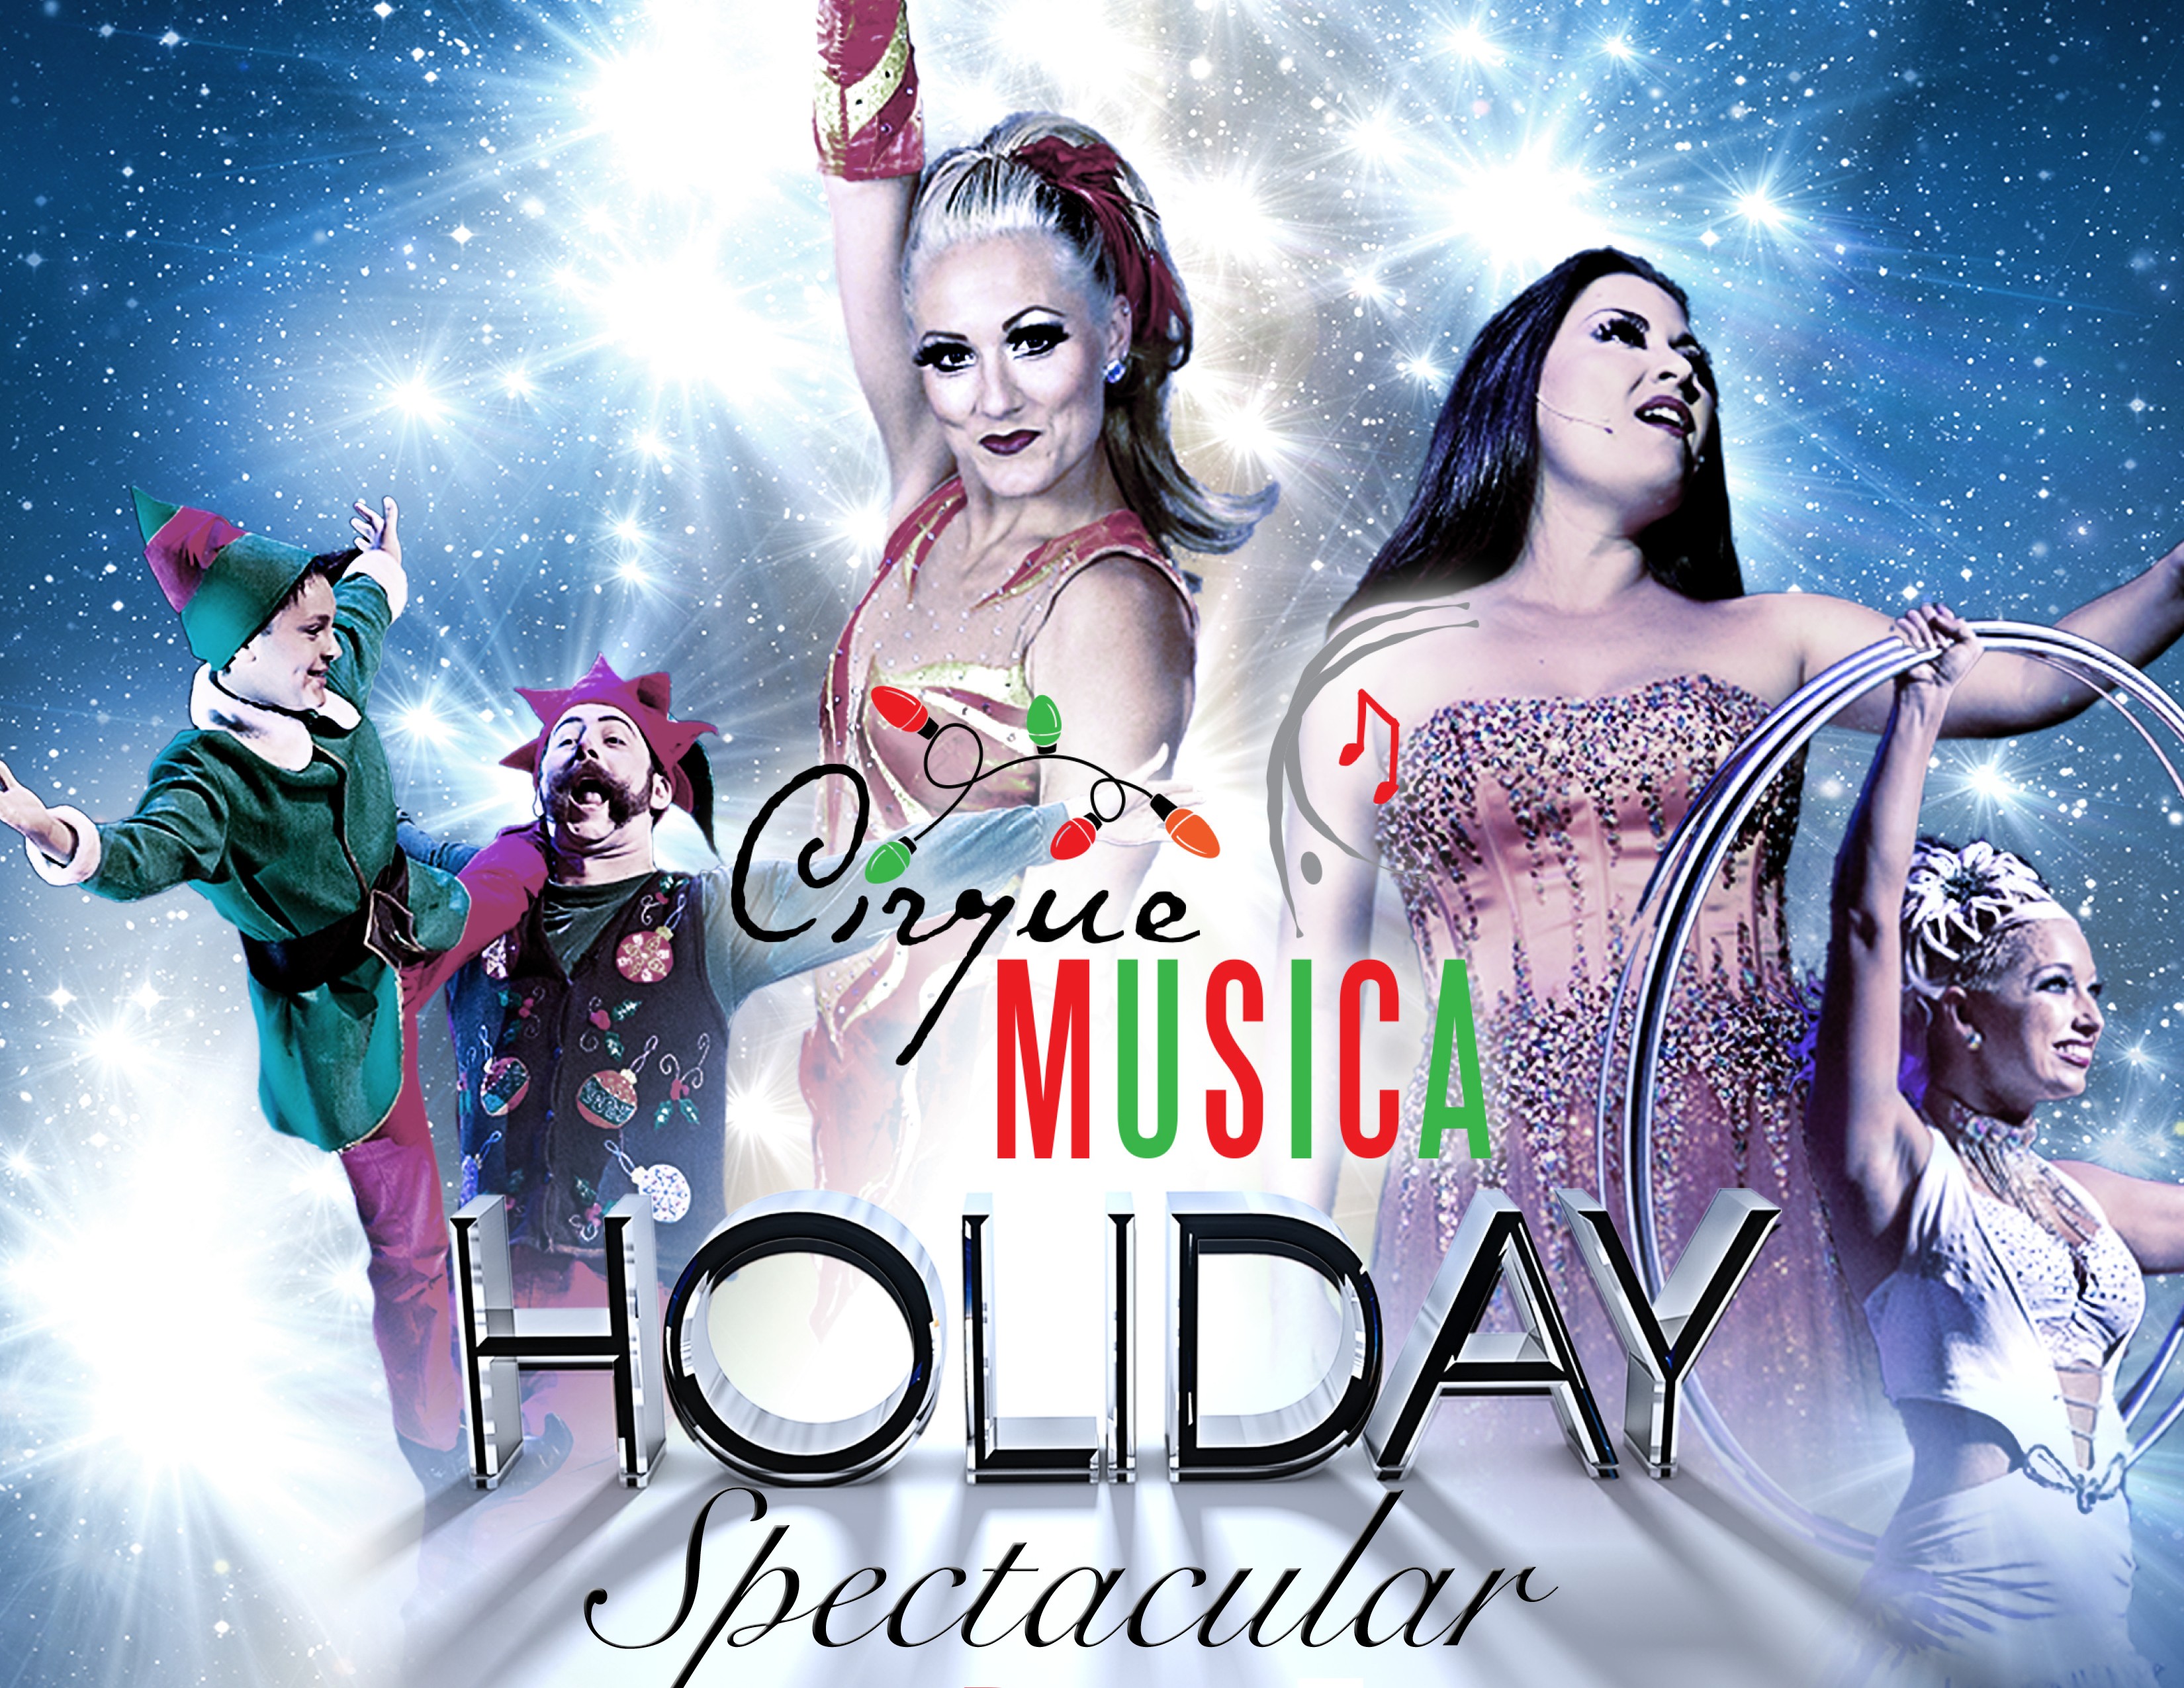 Cirque Musica Holiday Spectacular WRAL Visit and Rehearsal VIDEO